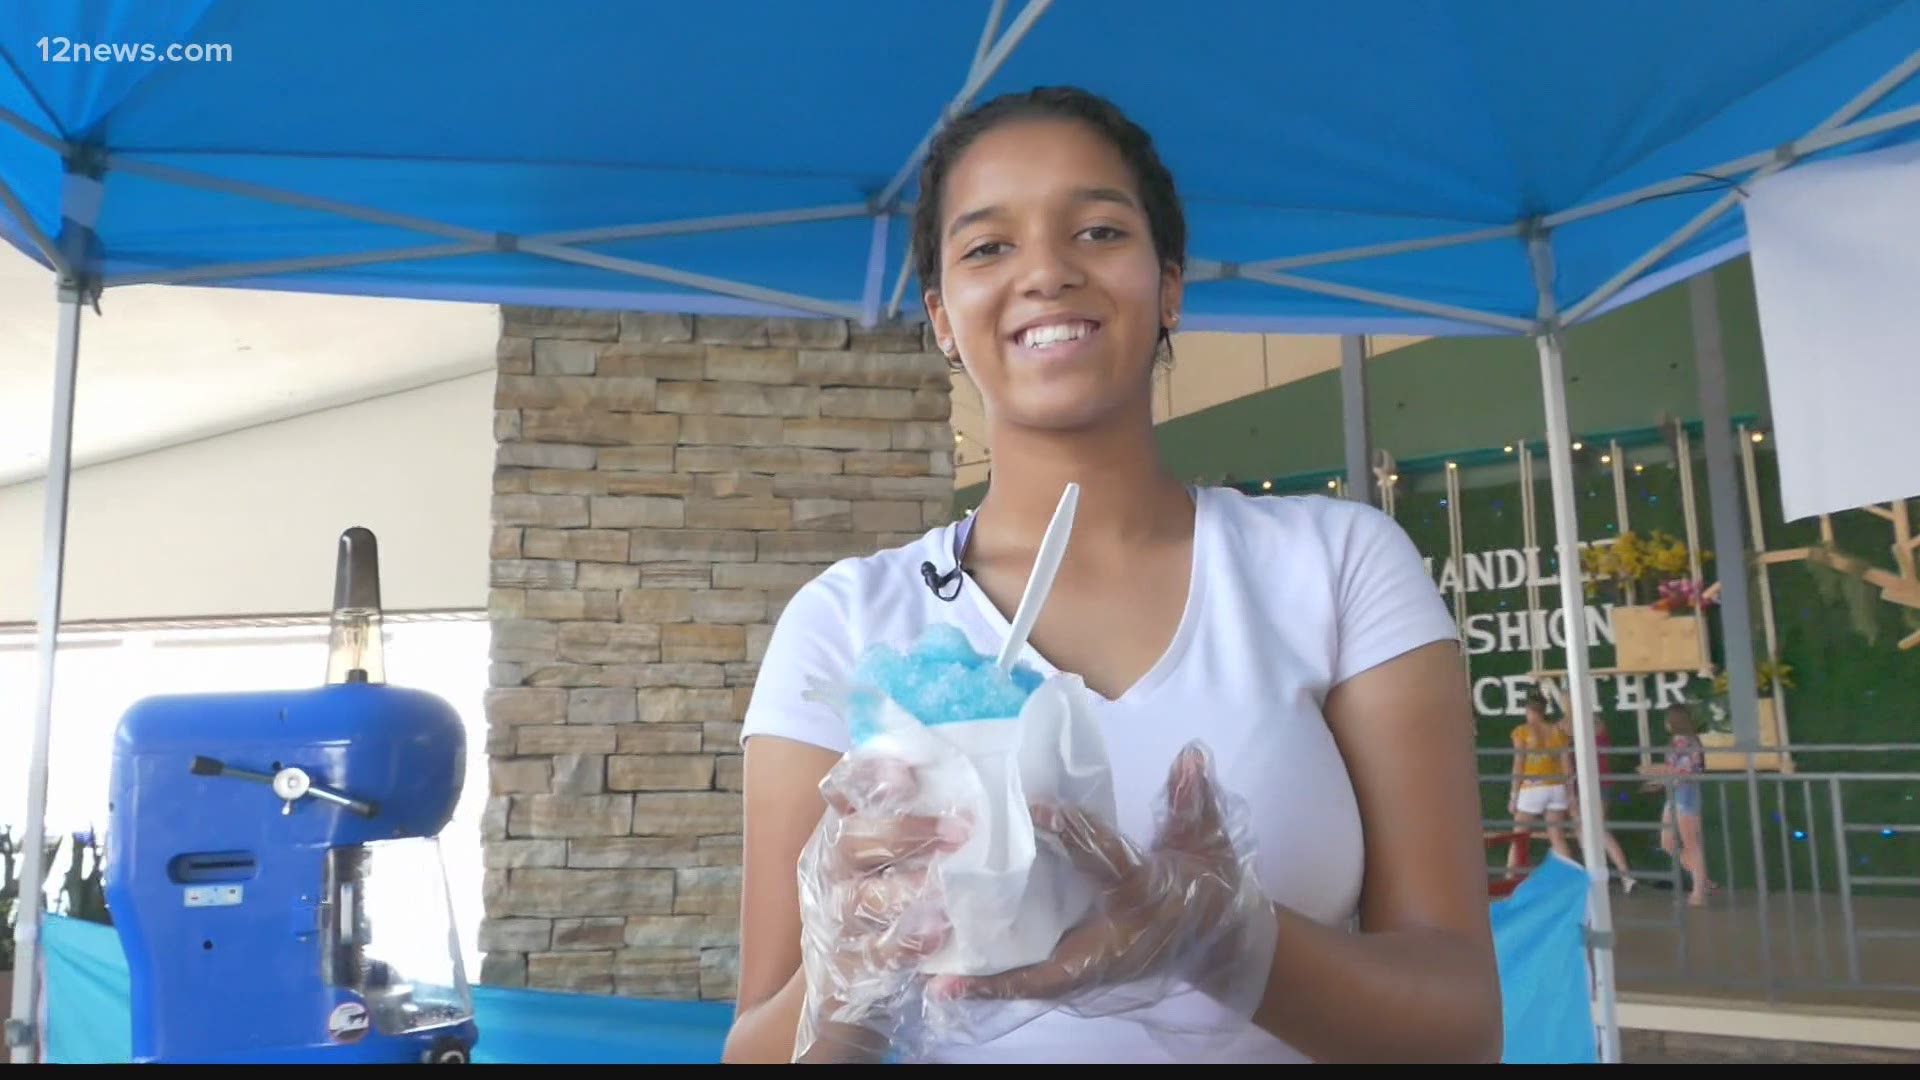 Chandler teen Milayna Jones has put in the preparation and the work to make her shaved ice business, Ice Therapy, a success just in time for summer!